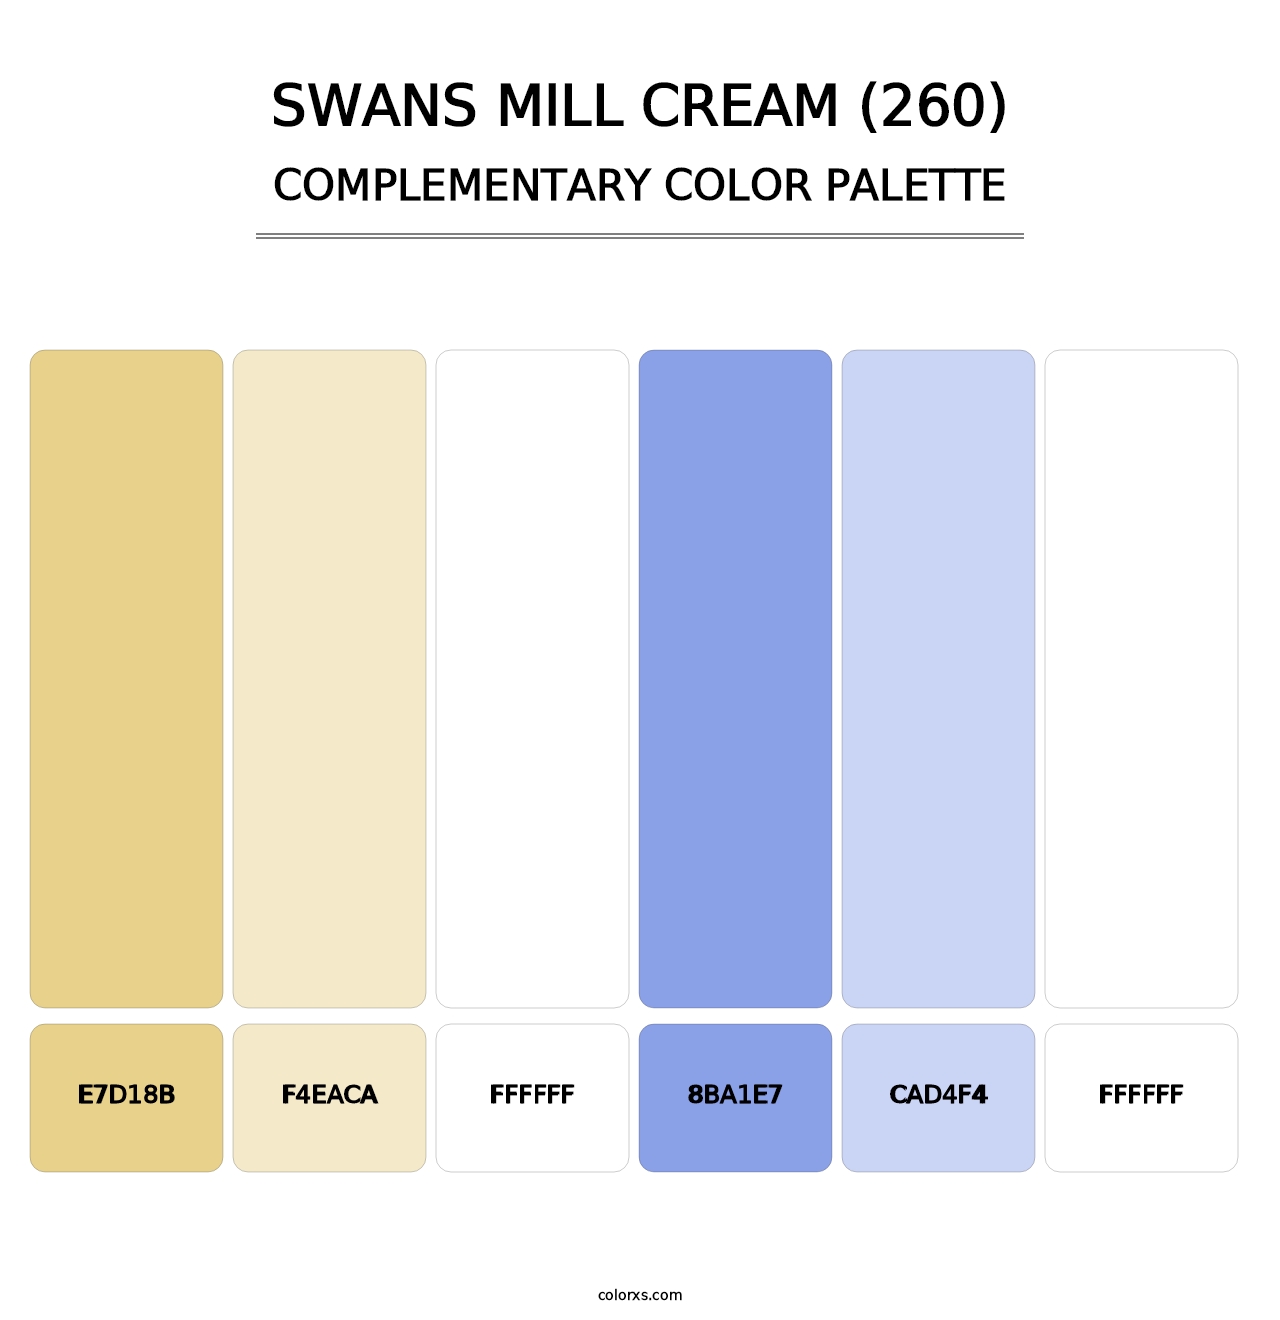 Swans Mill Cream (260) - Complementary Color Palette